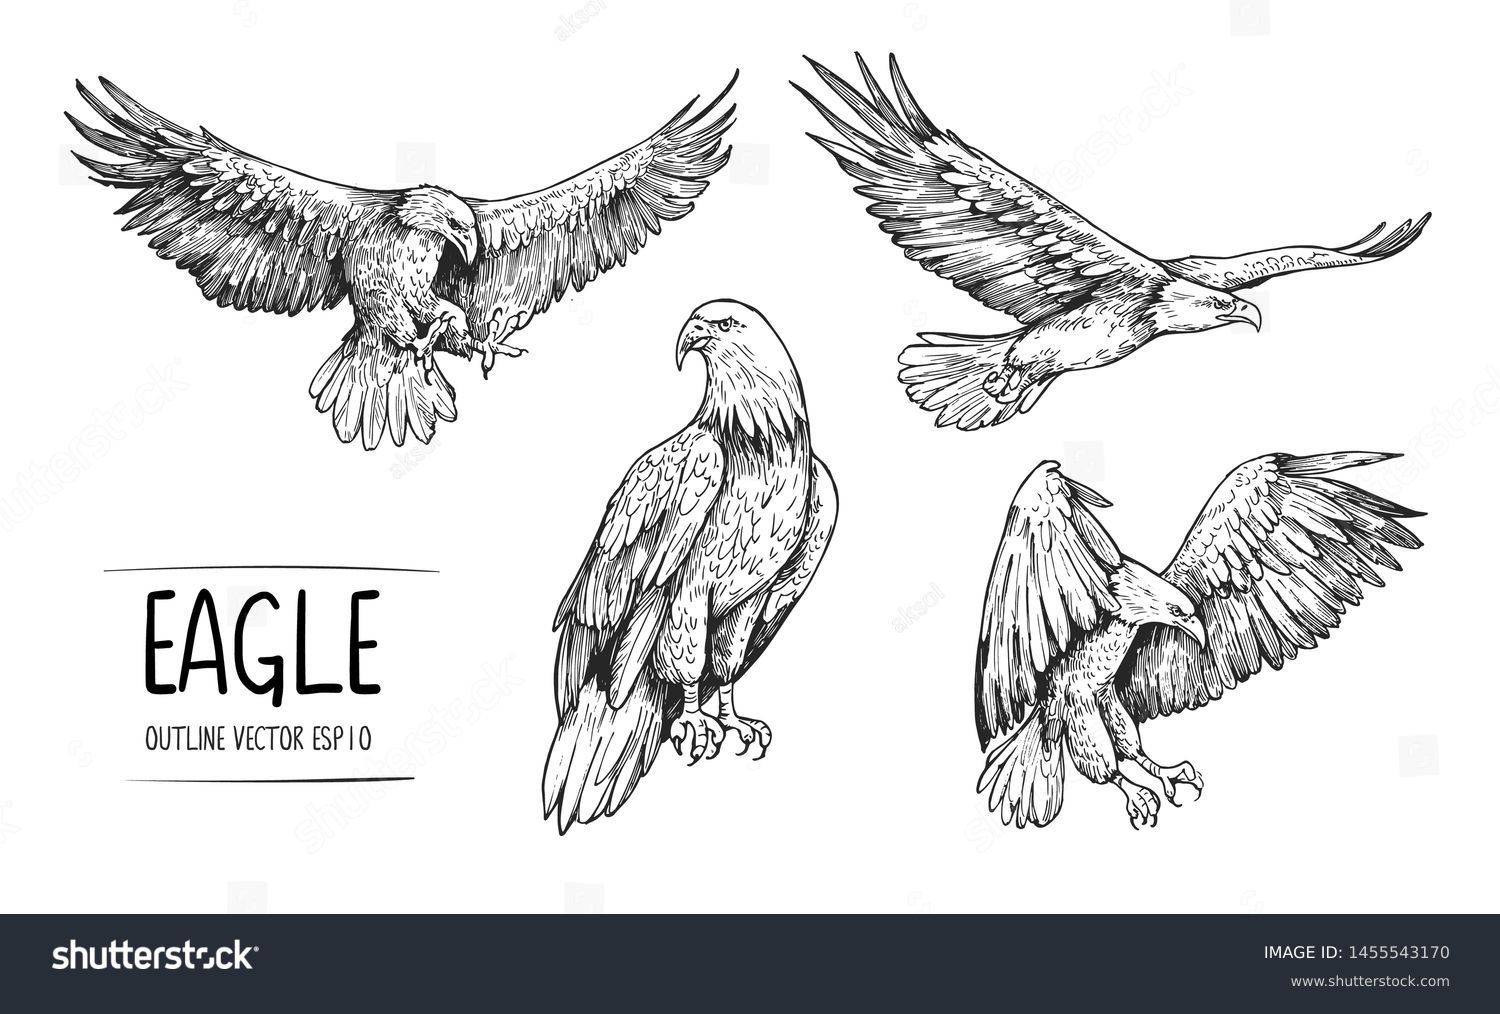 Black white flying eagle drawing royalty